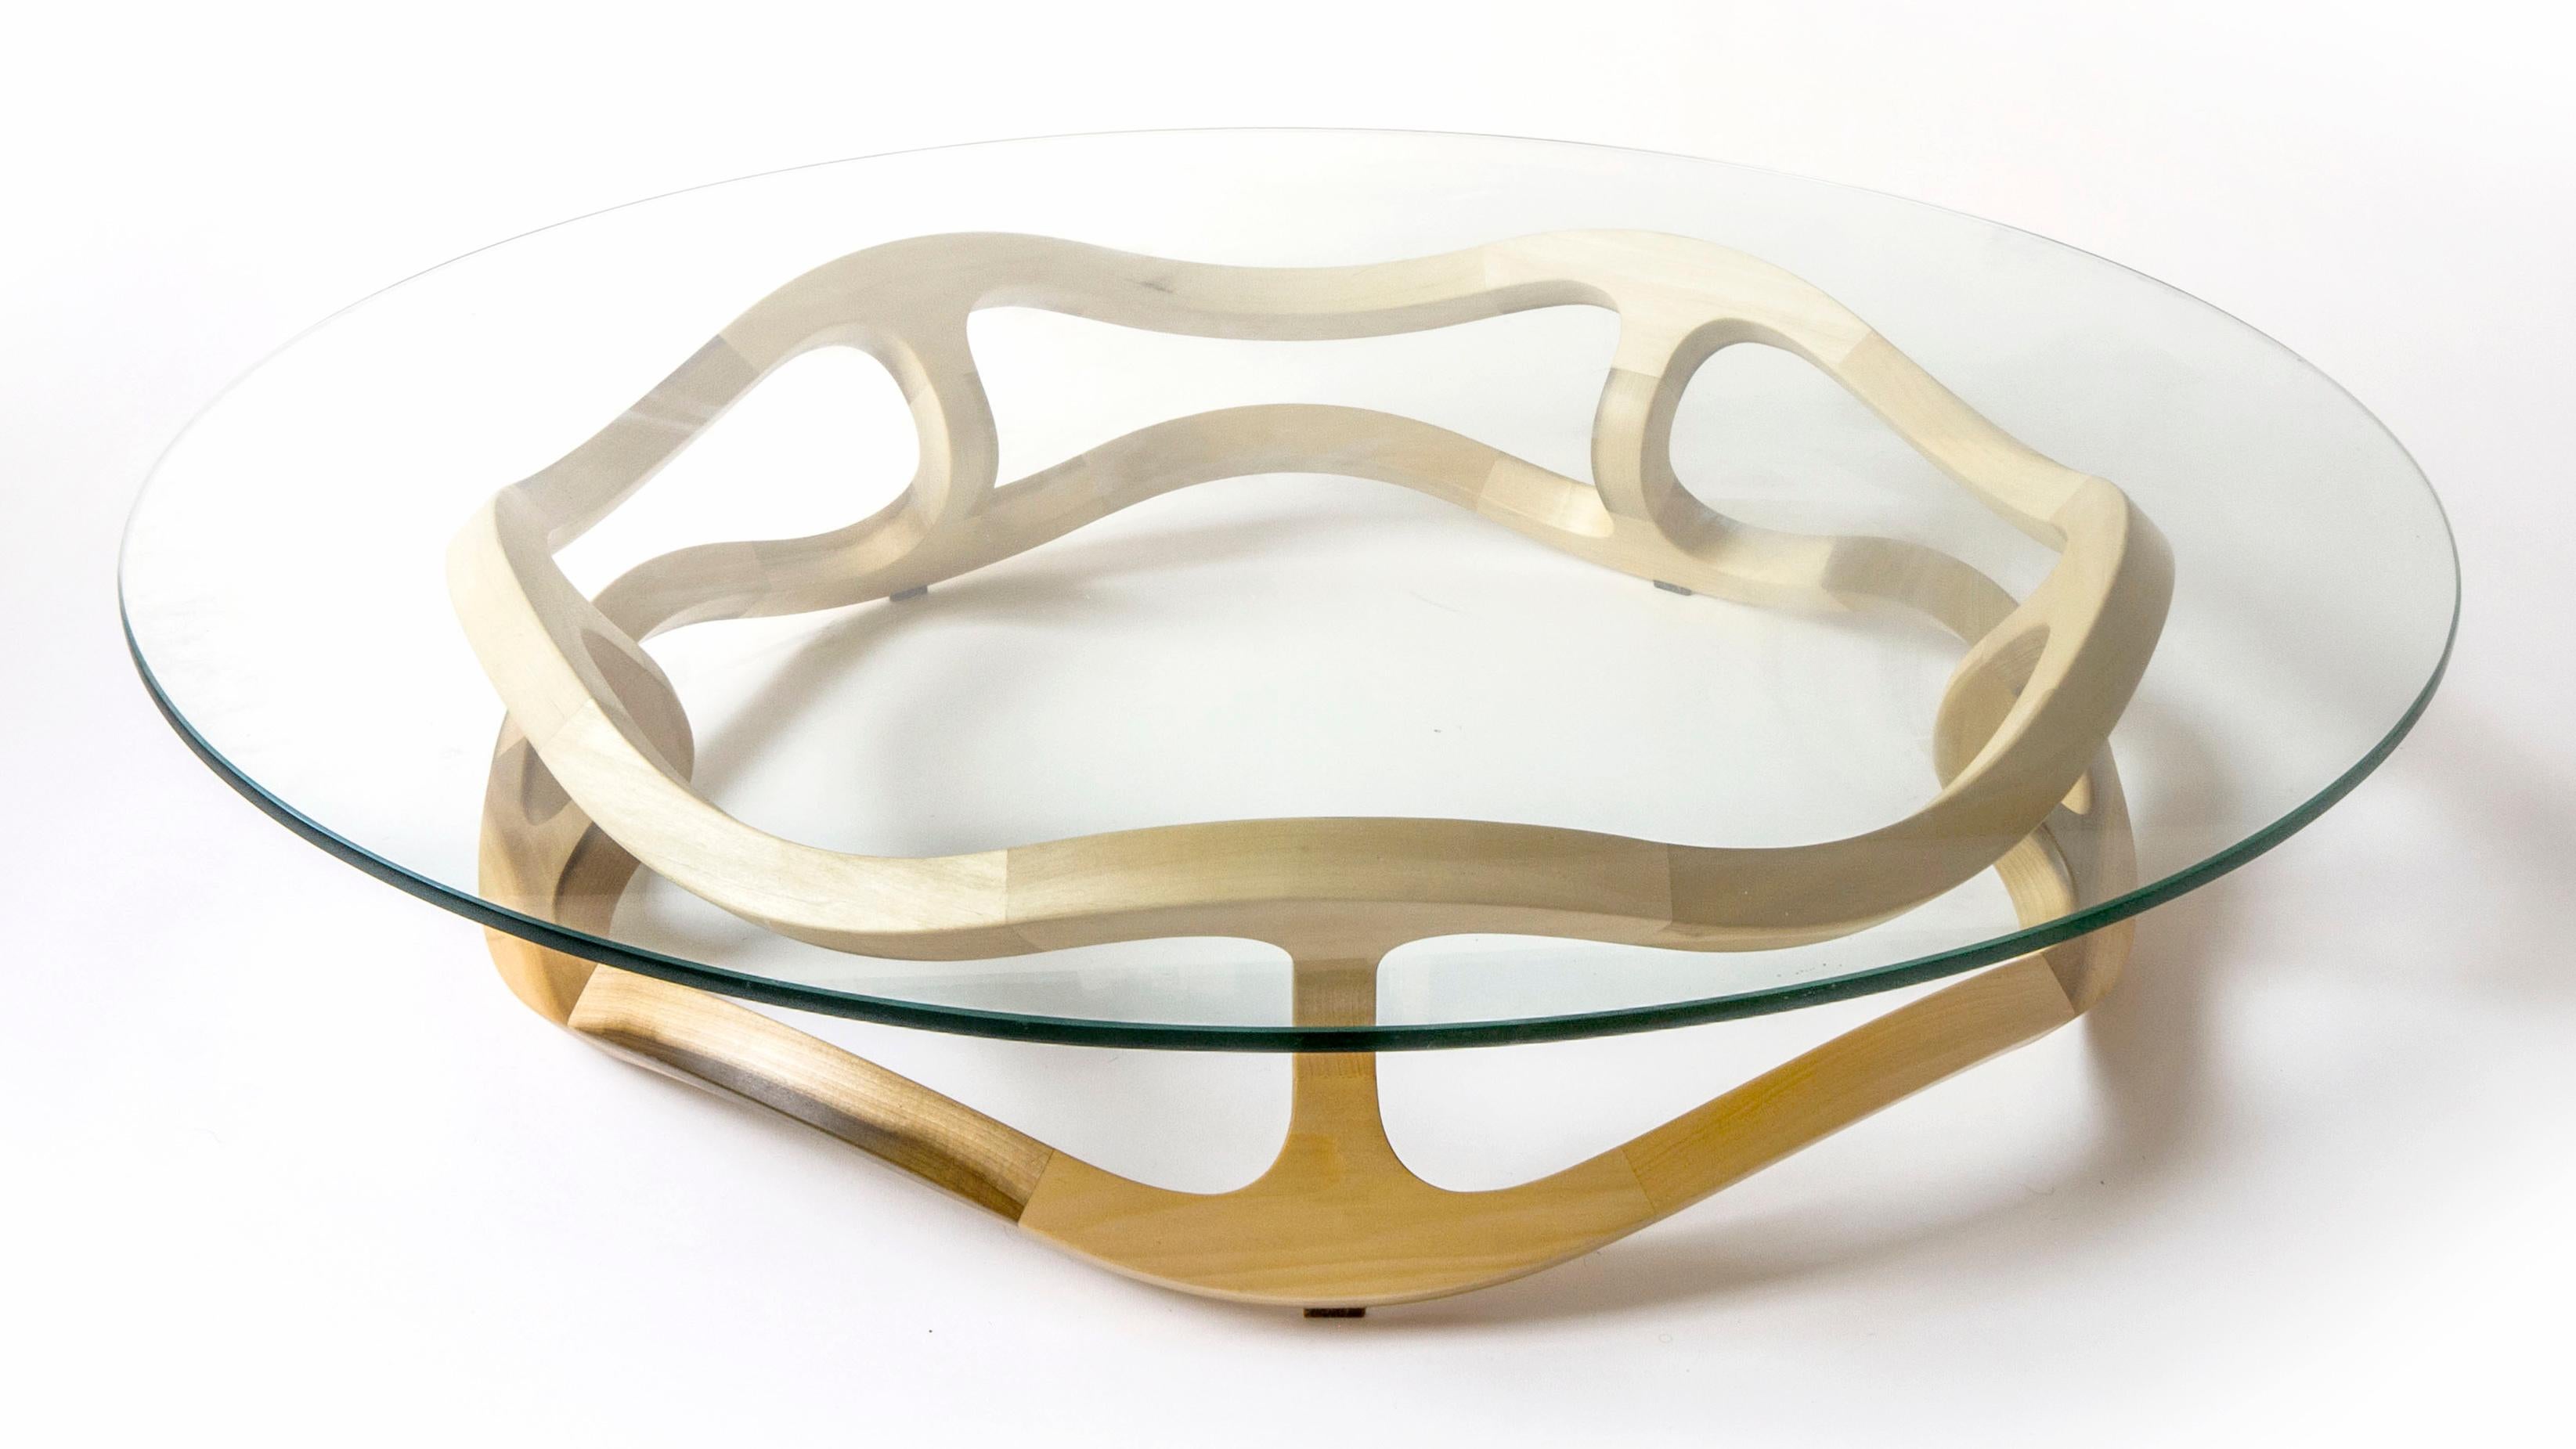 Flamenca, Geometric Sculptural Center Table Made of Solid Wood by Pedro Cerisola For Sale 2